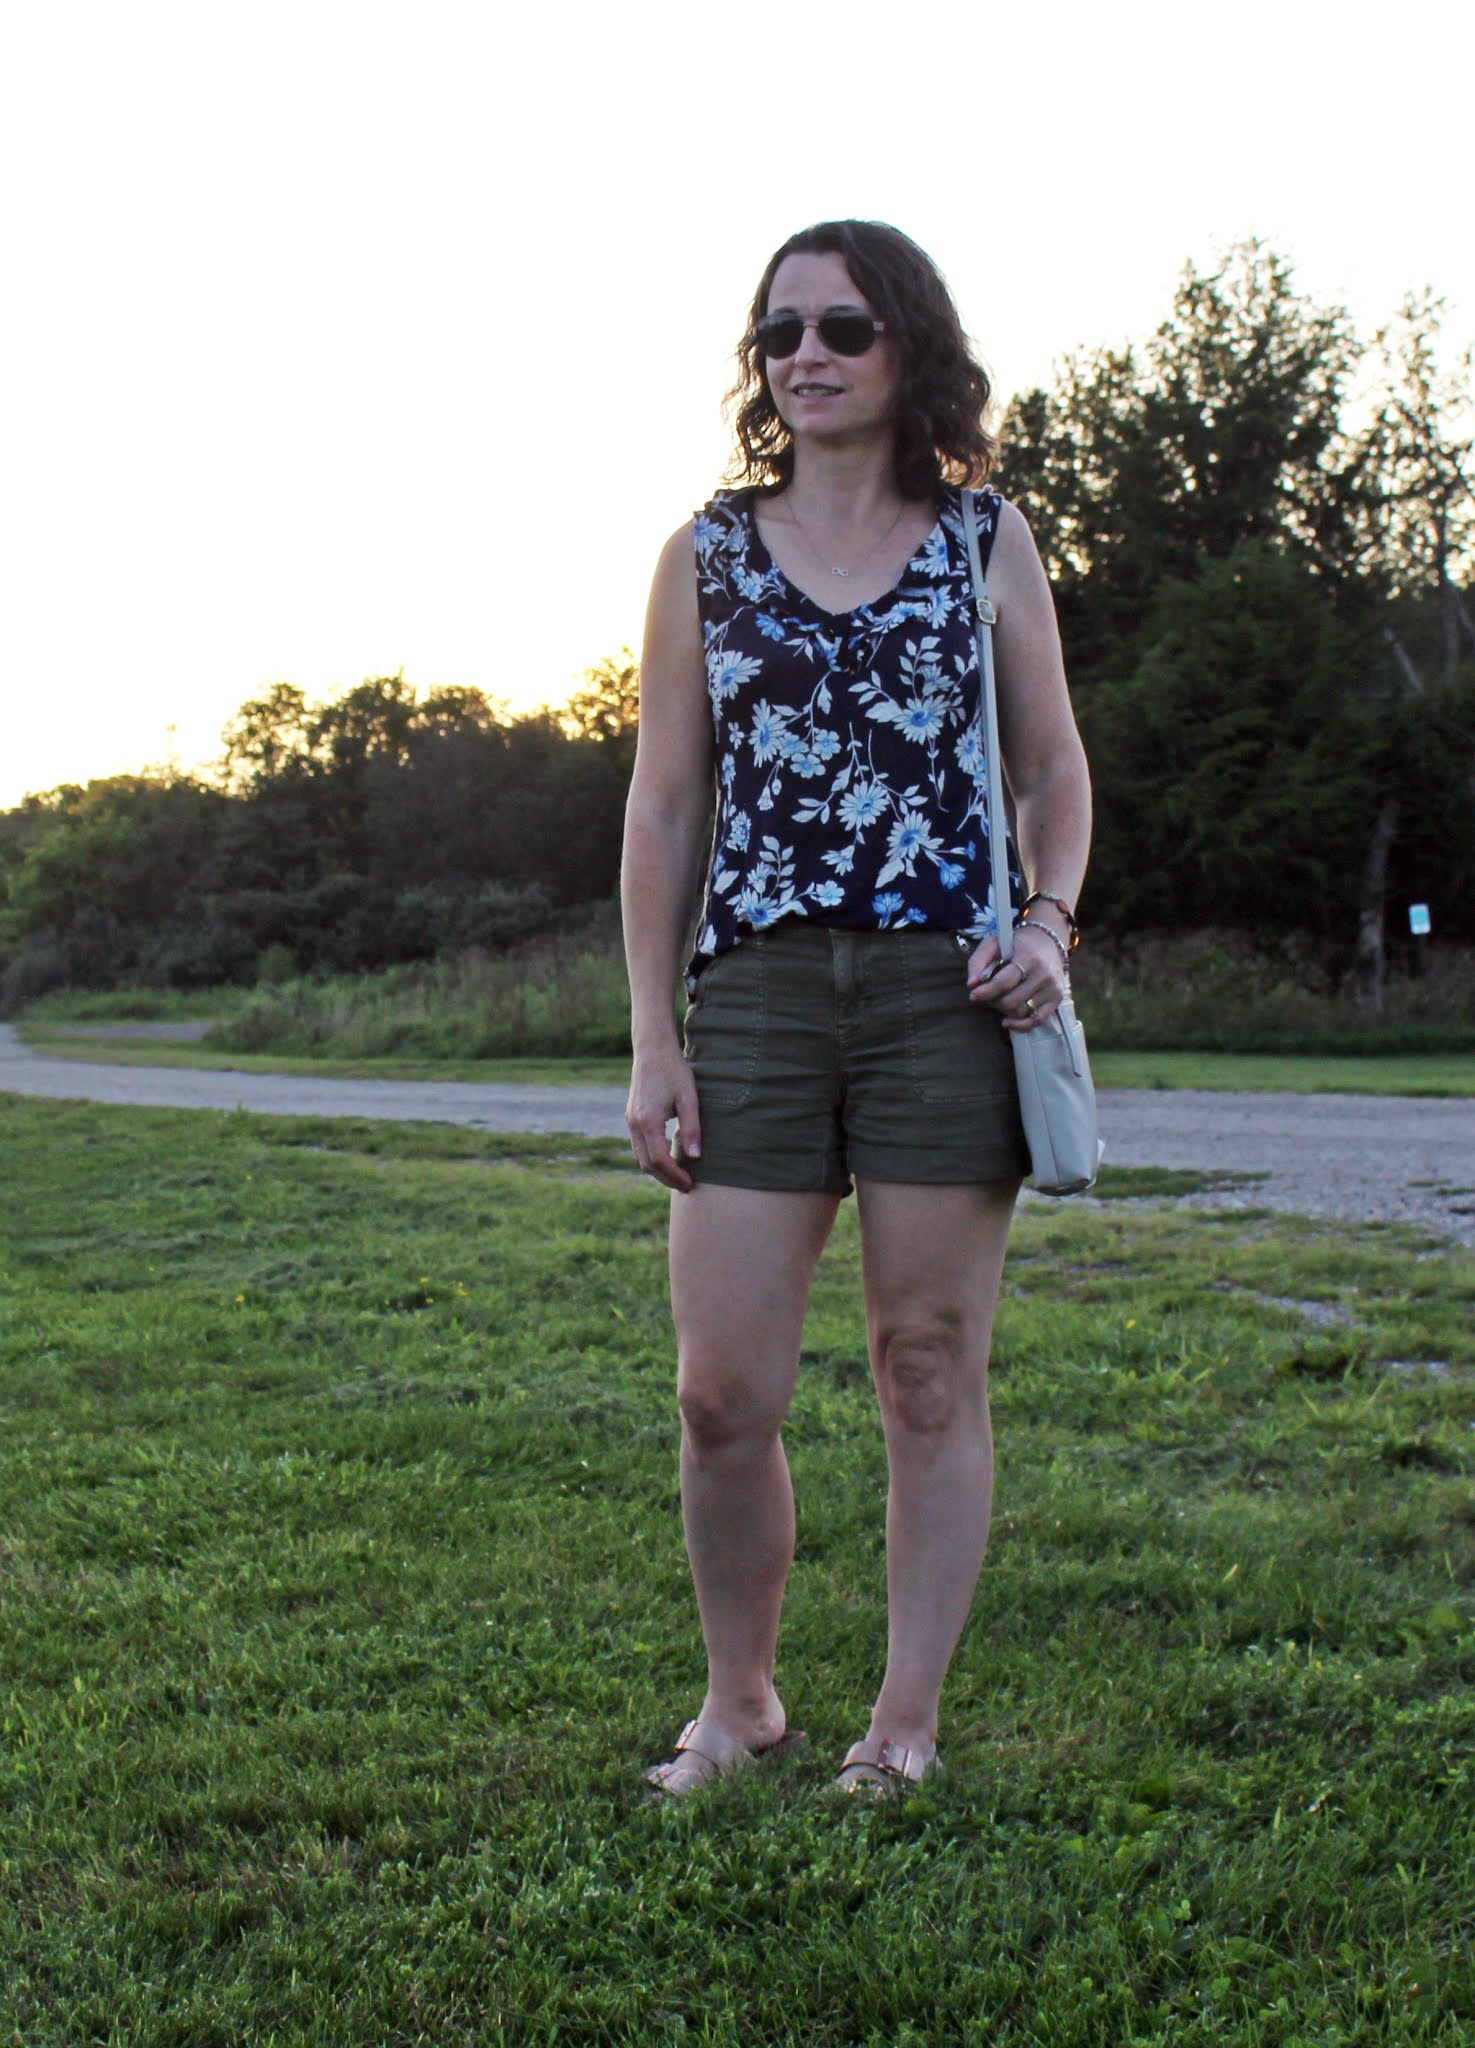 Ellibelle's Corner: Olive Utility Shorts and a Navy Floral Blouse ...